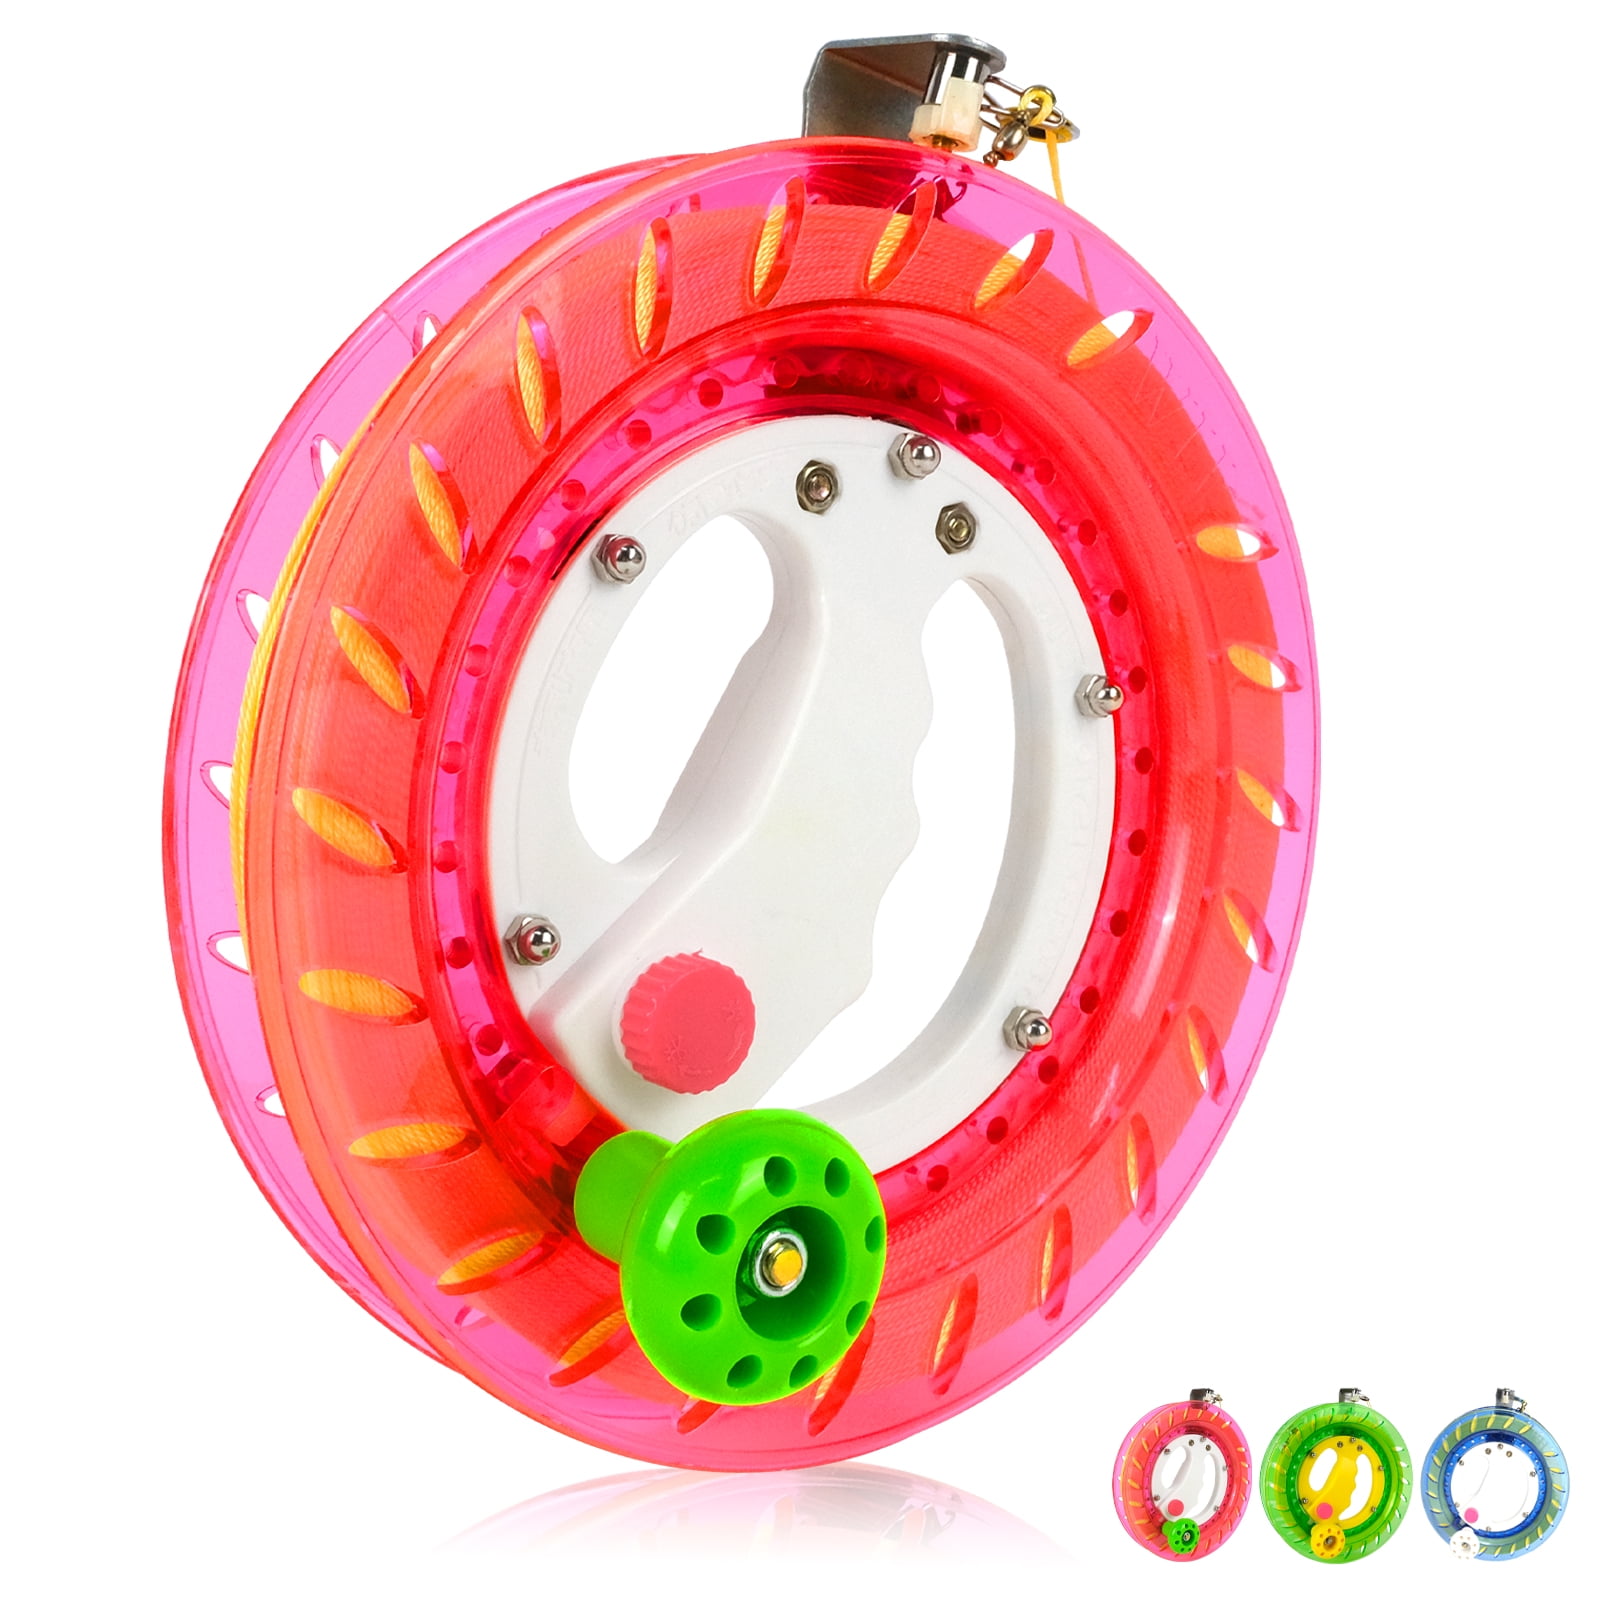 Mint's Colorful Life Outdoor Kite Reel Winder Kite Line Winding Reel Easy  to Handle 